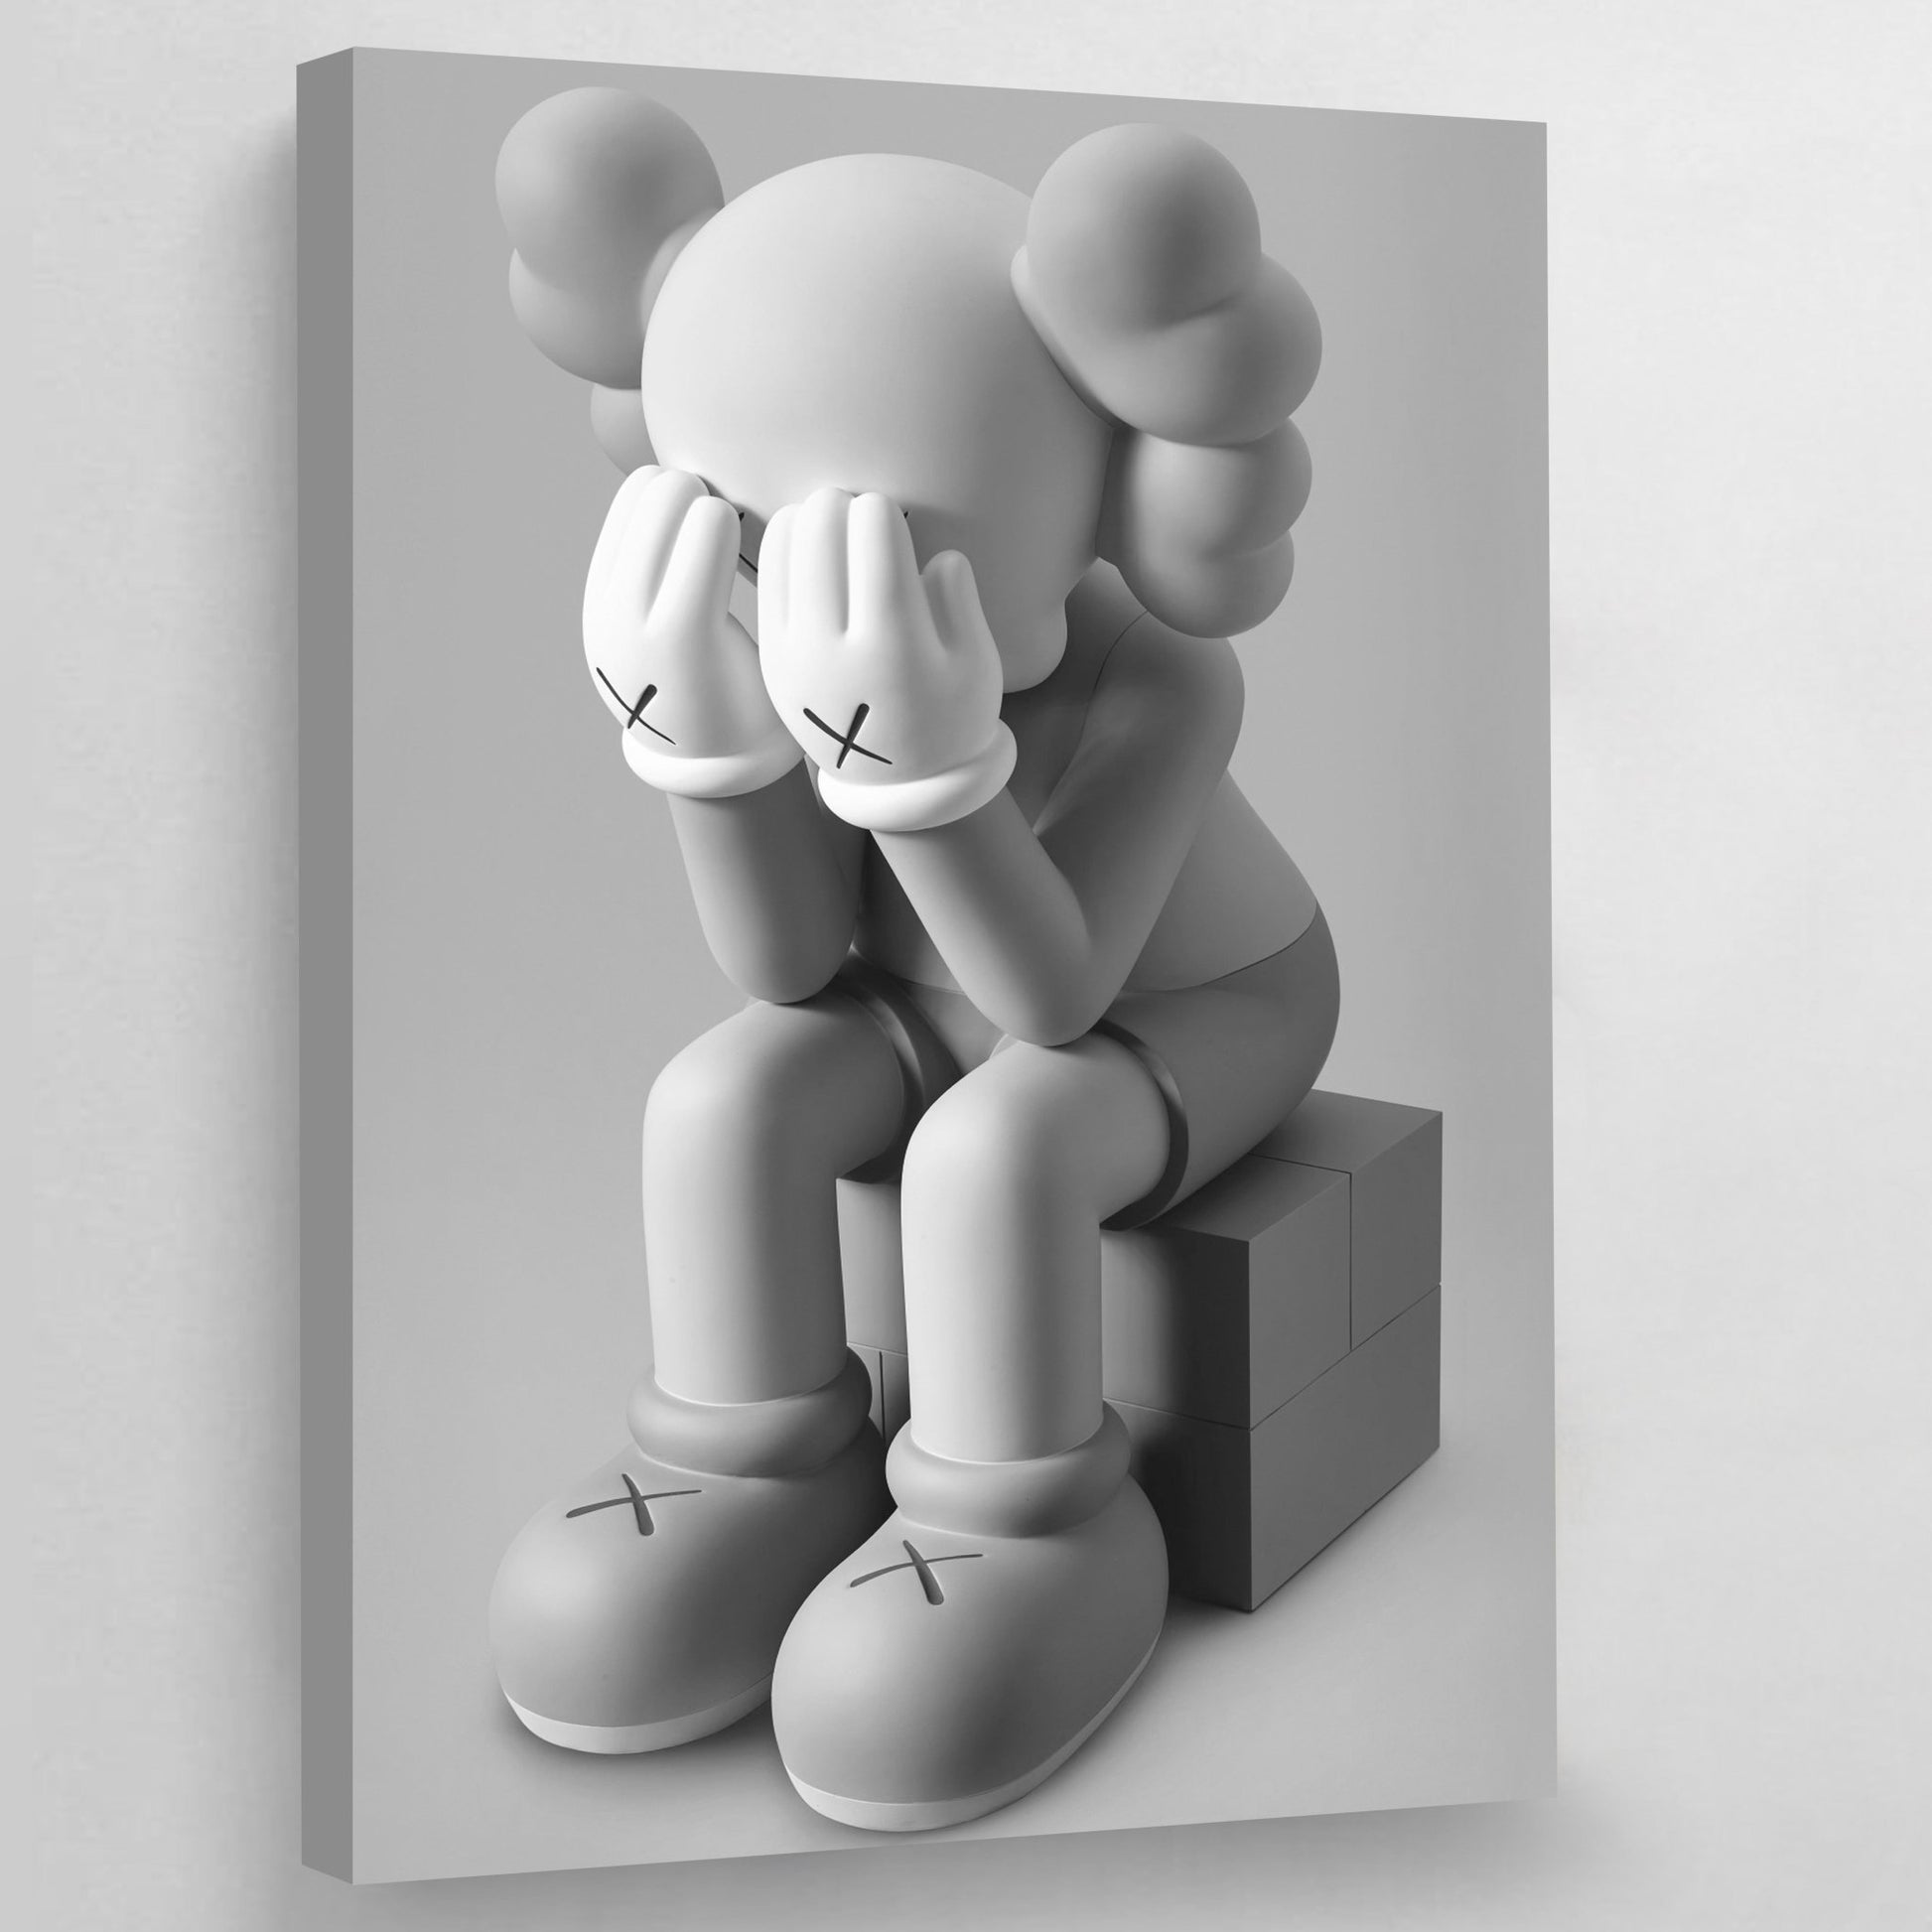 Popular Bearbricks and other cutting-edge toys and art